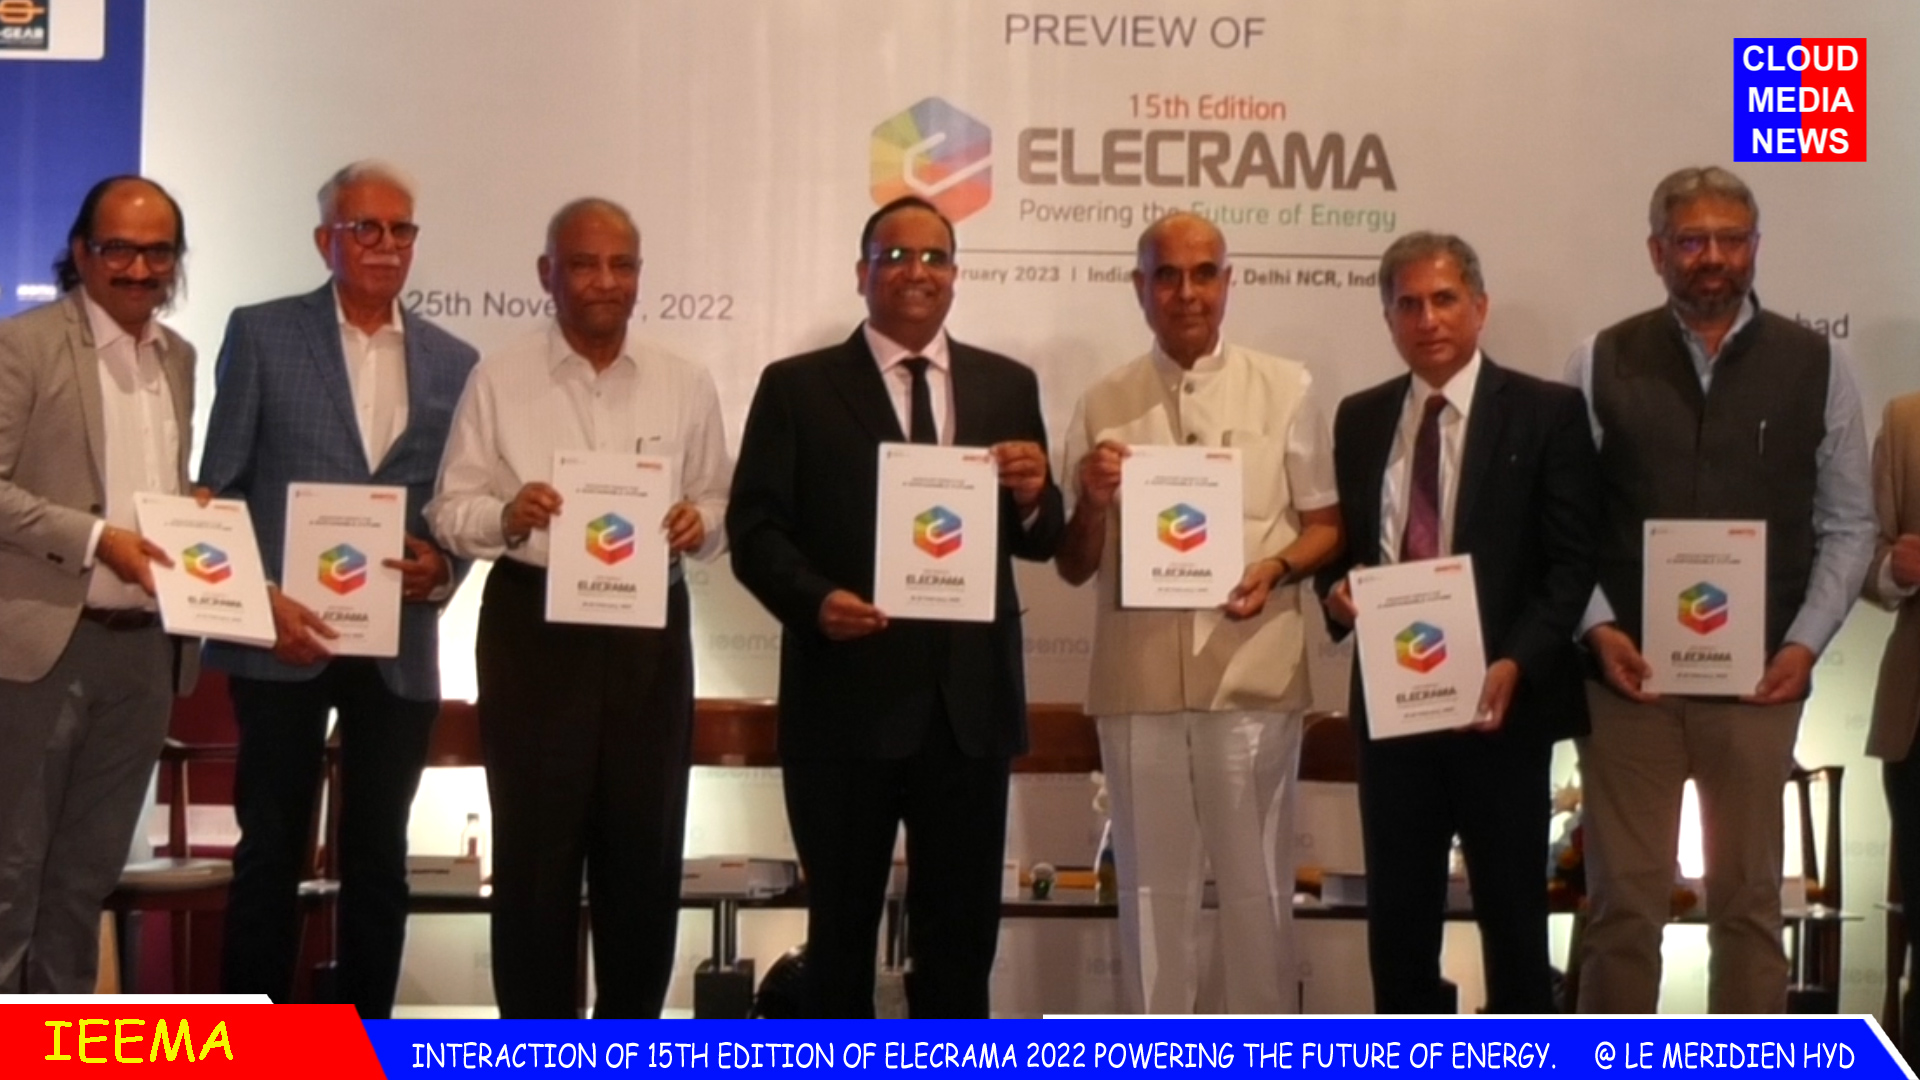 IEEMAINTERACTION of 15th Edition of ELECRAMA 2022 powering the future of Energy | CloudMedia